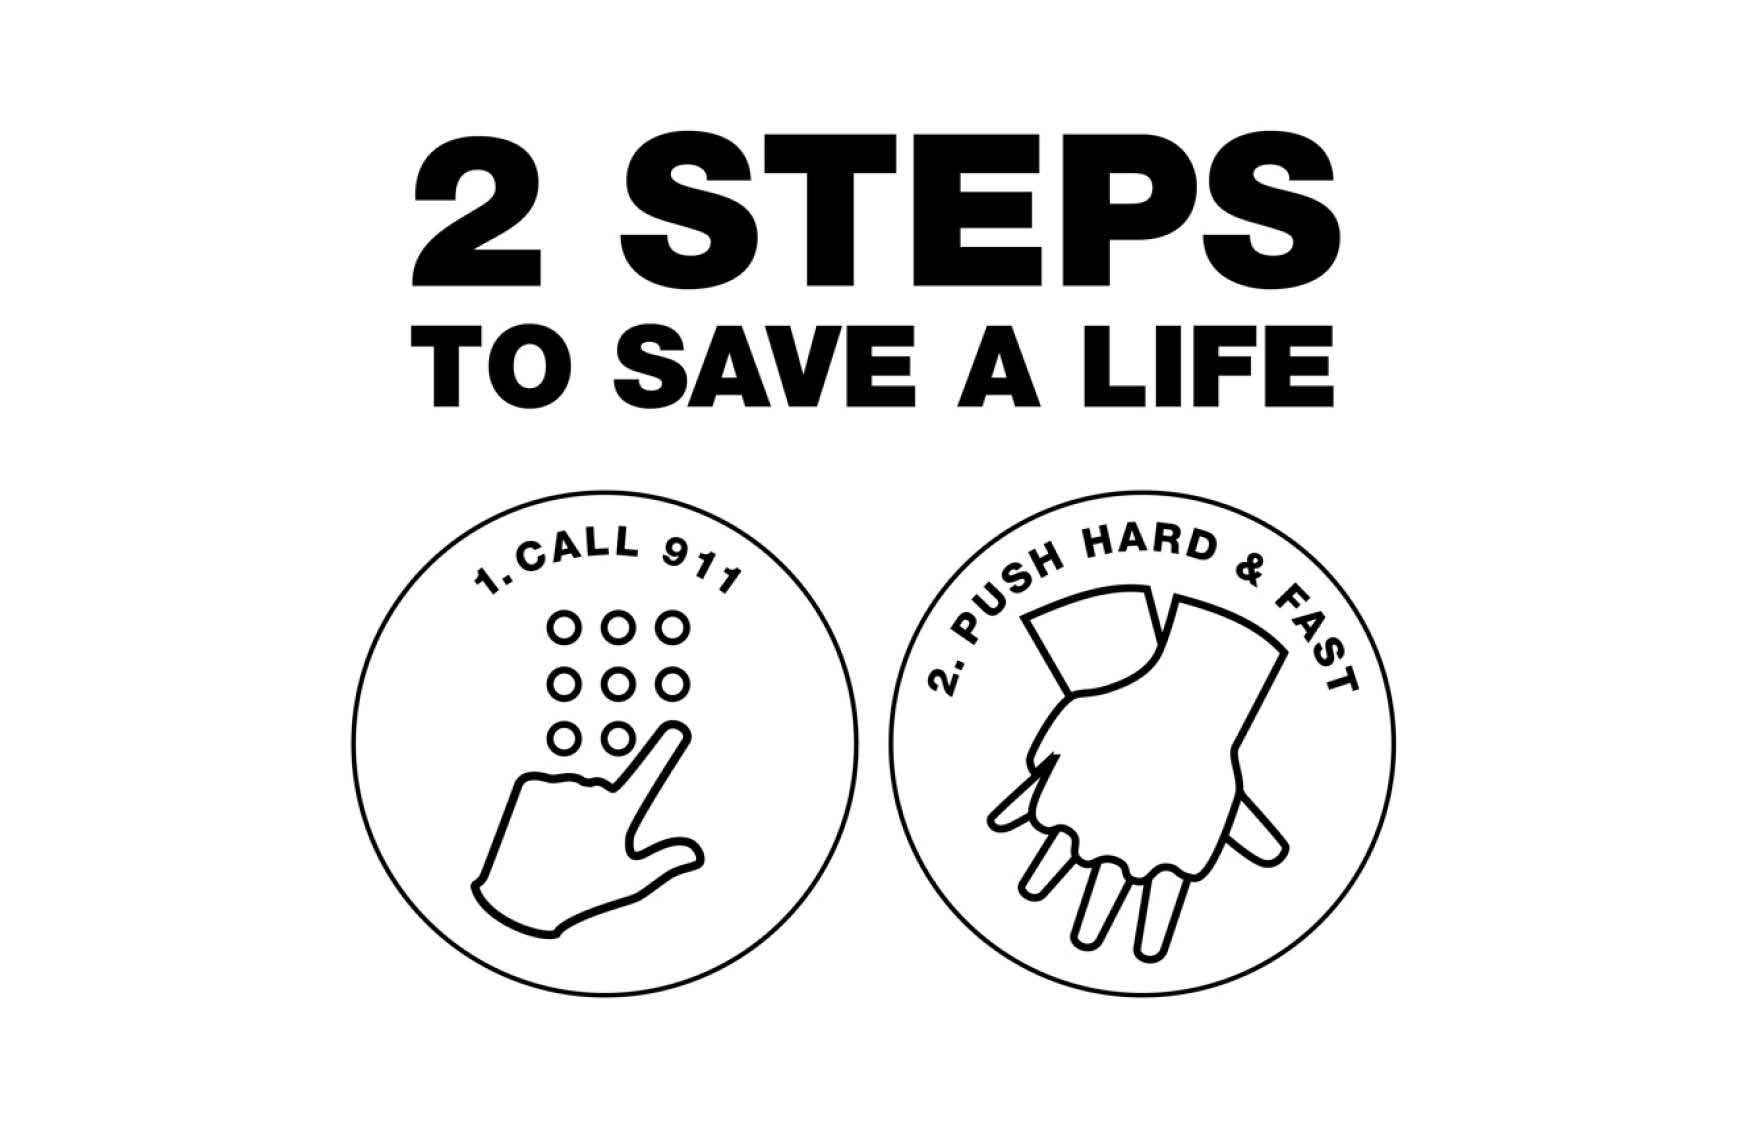 /-/media/CPR-Images/2-Steps-To-Save-a